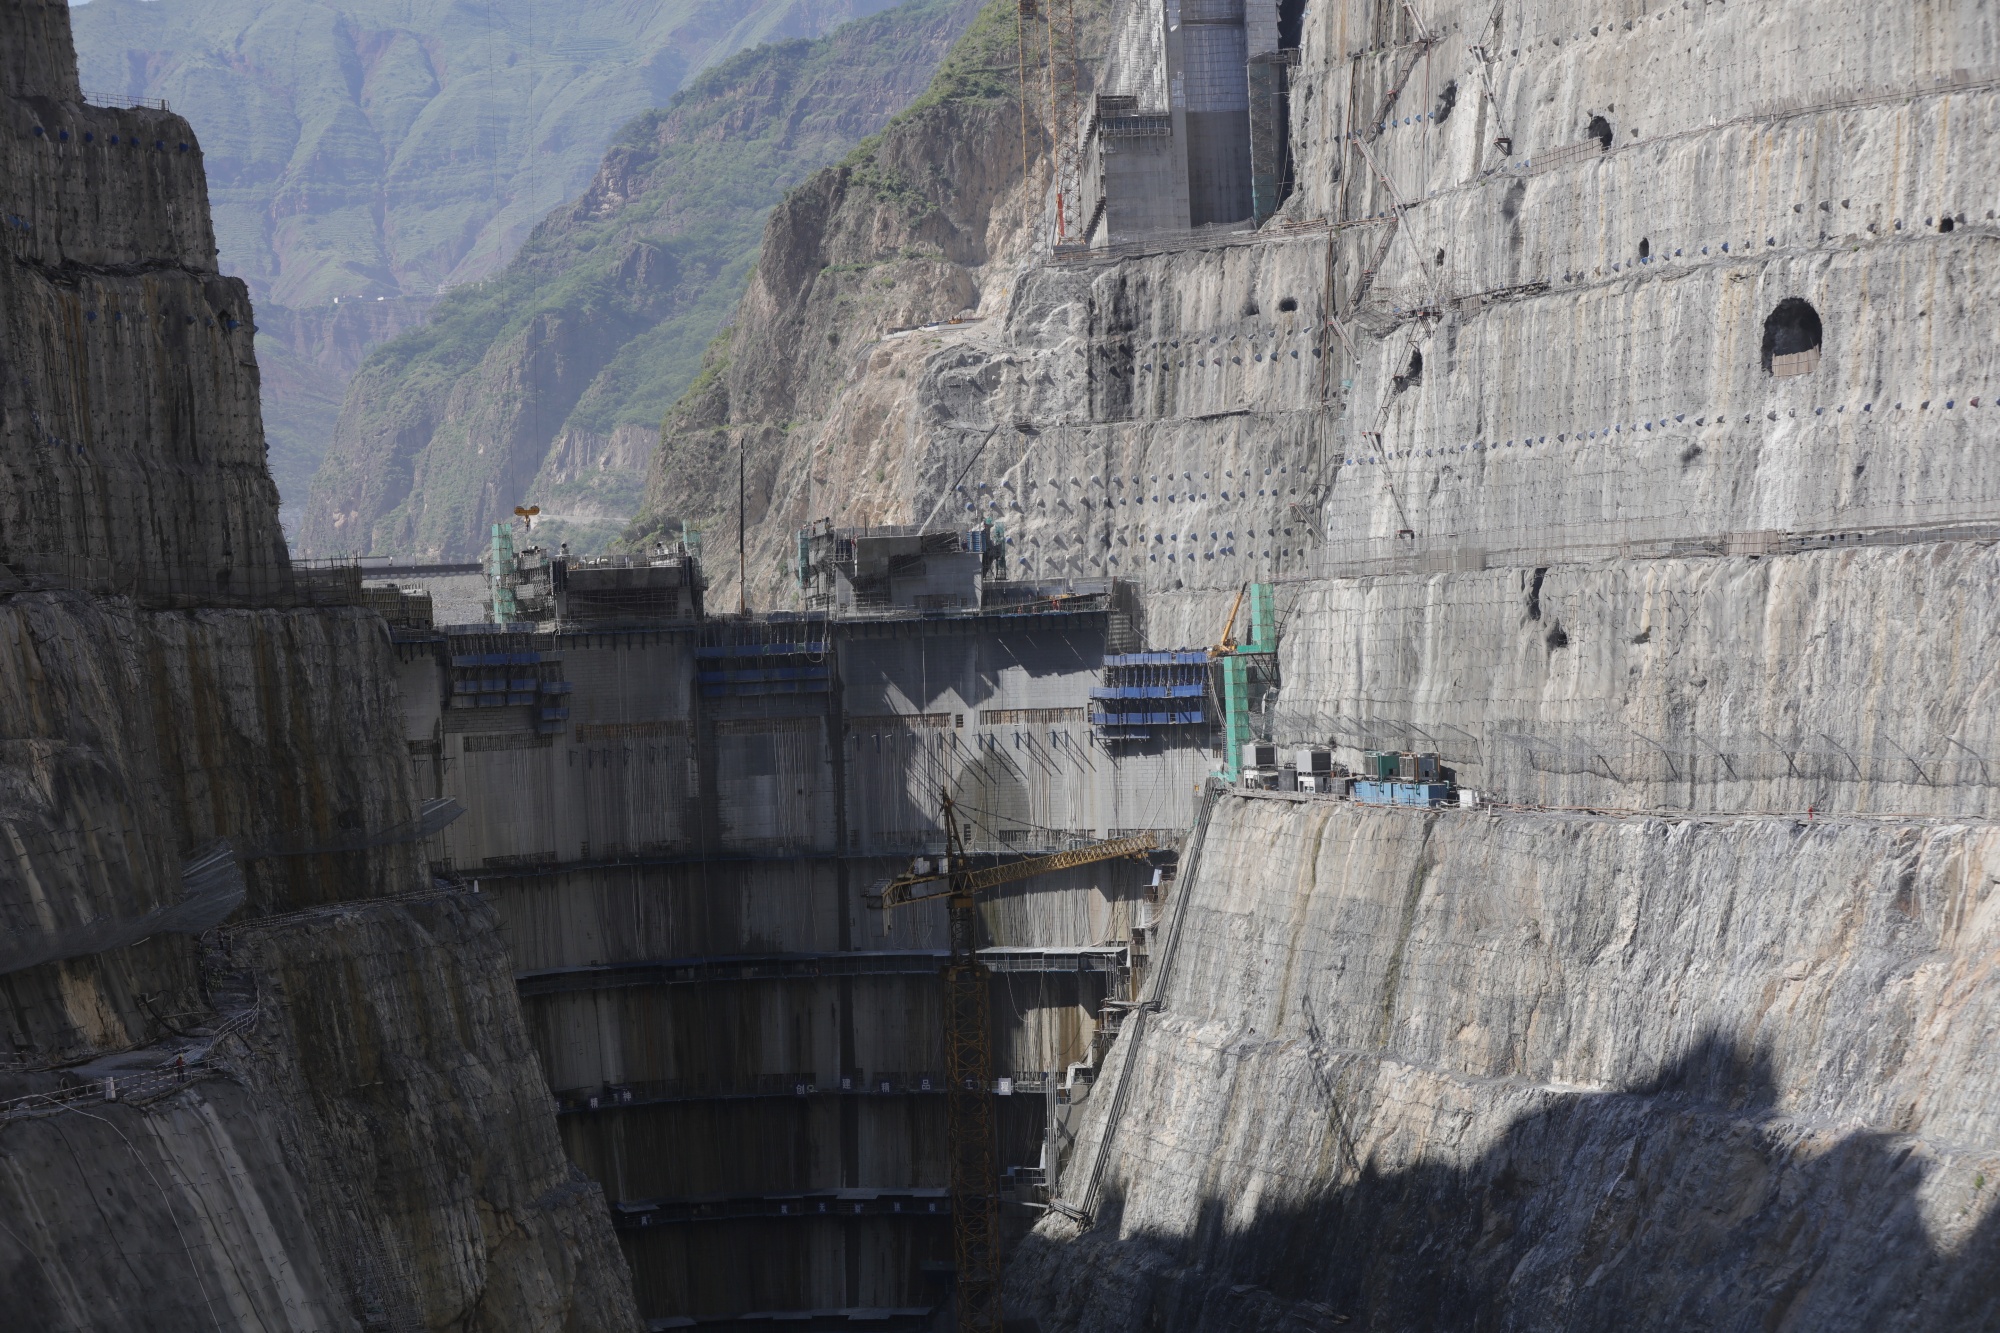 The construction of Wudongde Hydropower Station in 2018.